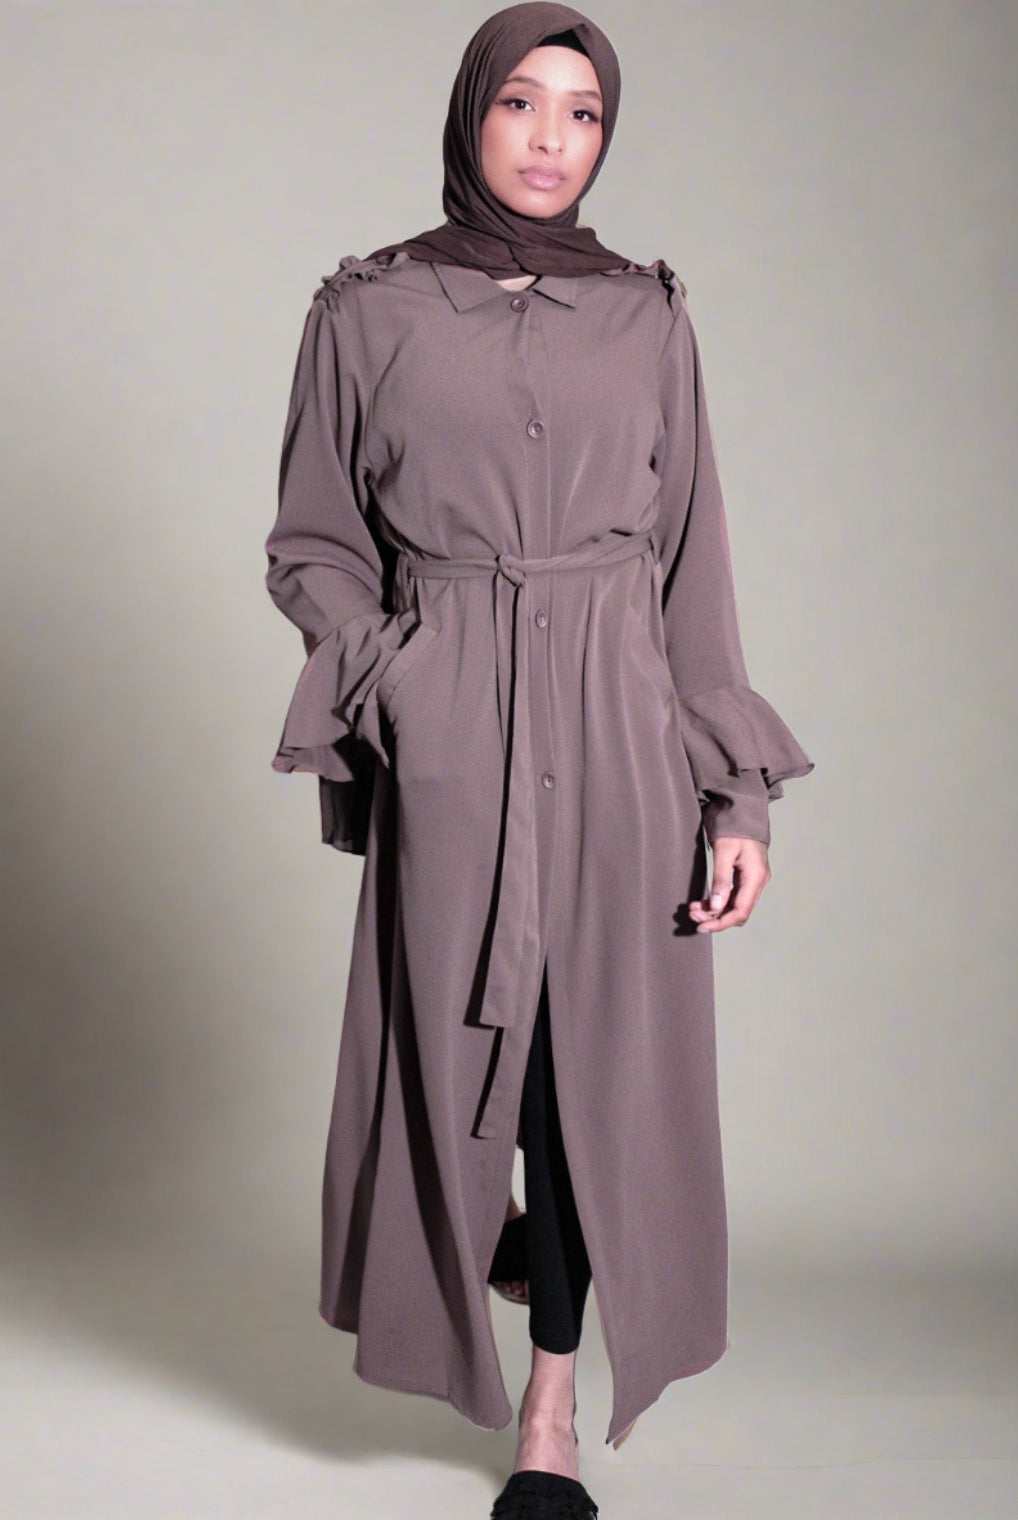 modest open abaya with extra arm room shirt style front button jacket. a modest fashion must